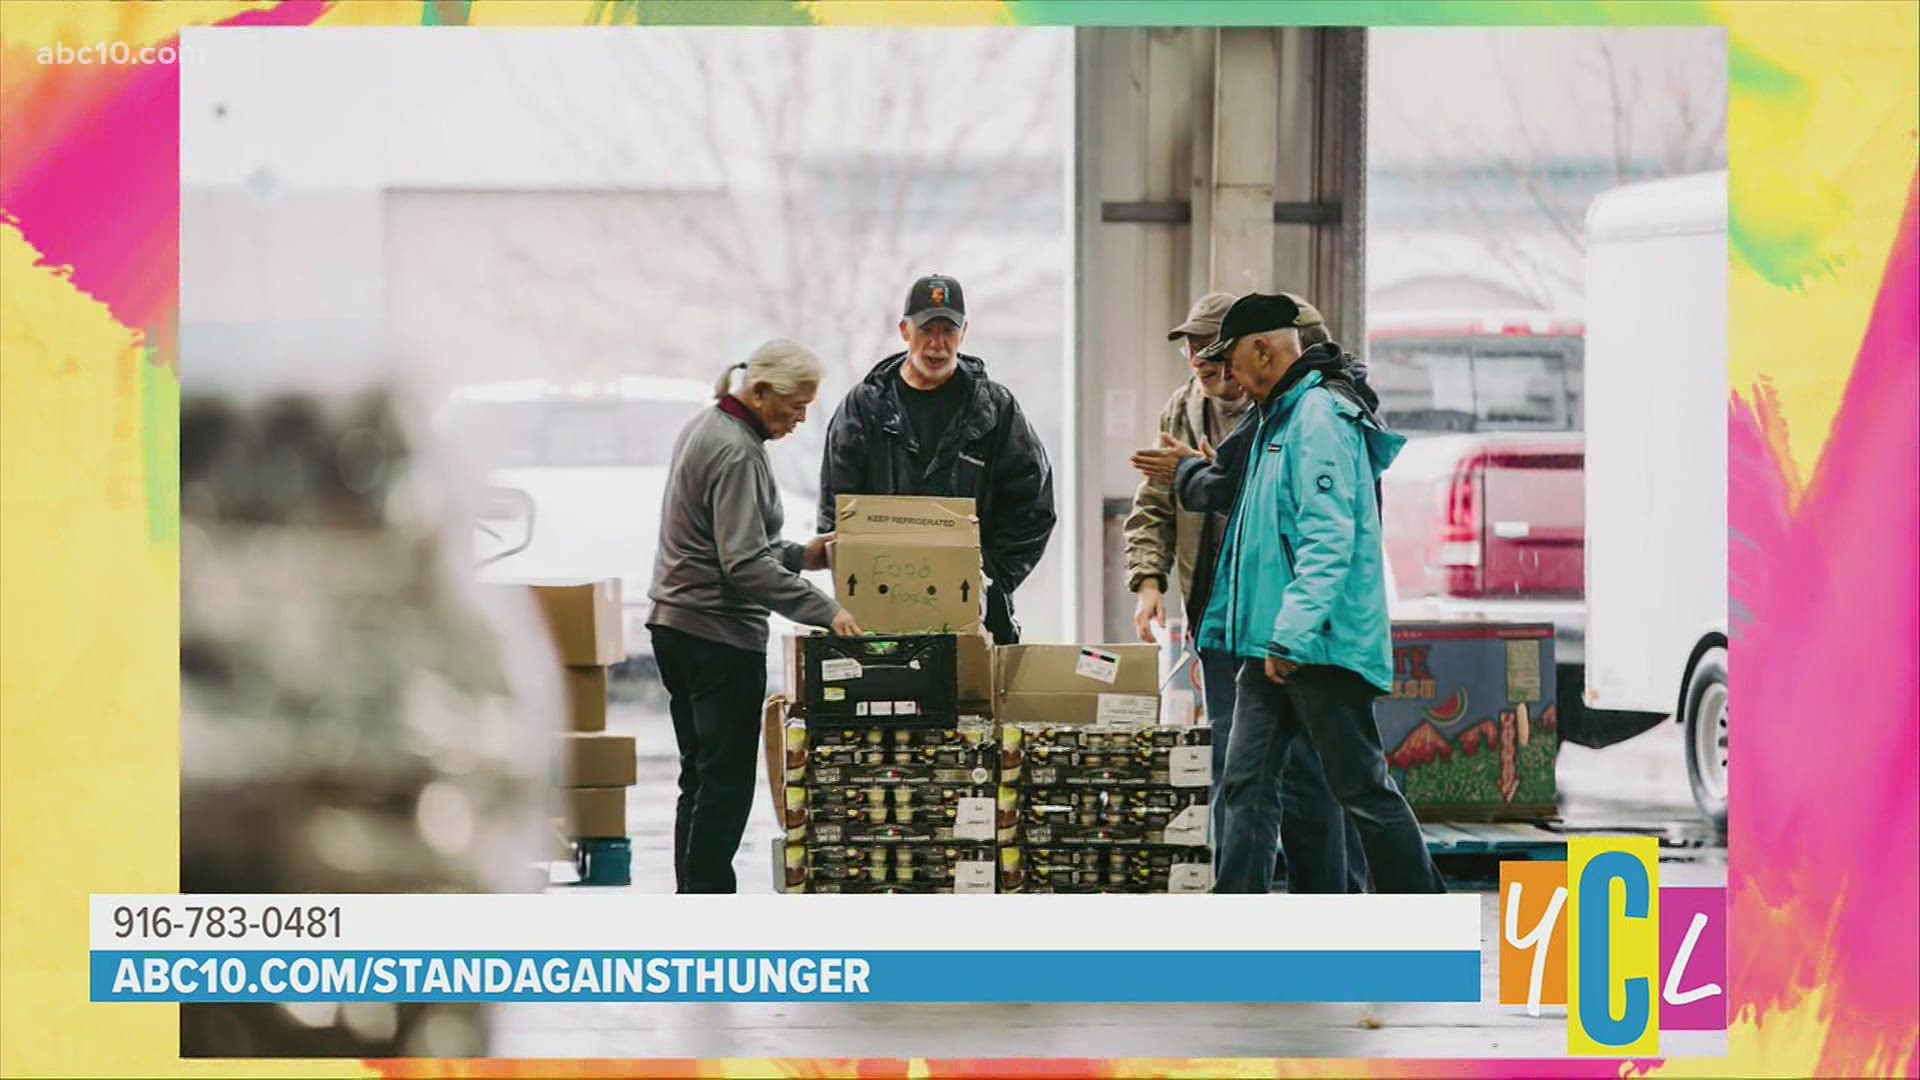 Placer Food Bank’s Lisa Heinrich informs us on food insecurity, its prevalence in our area and how we can all help. This segment was paid for by Placer Food Bank.